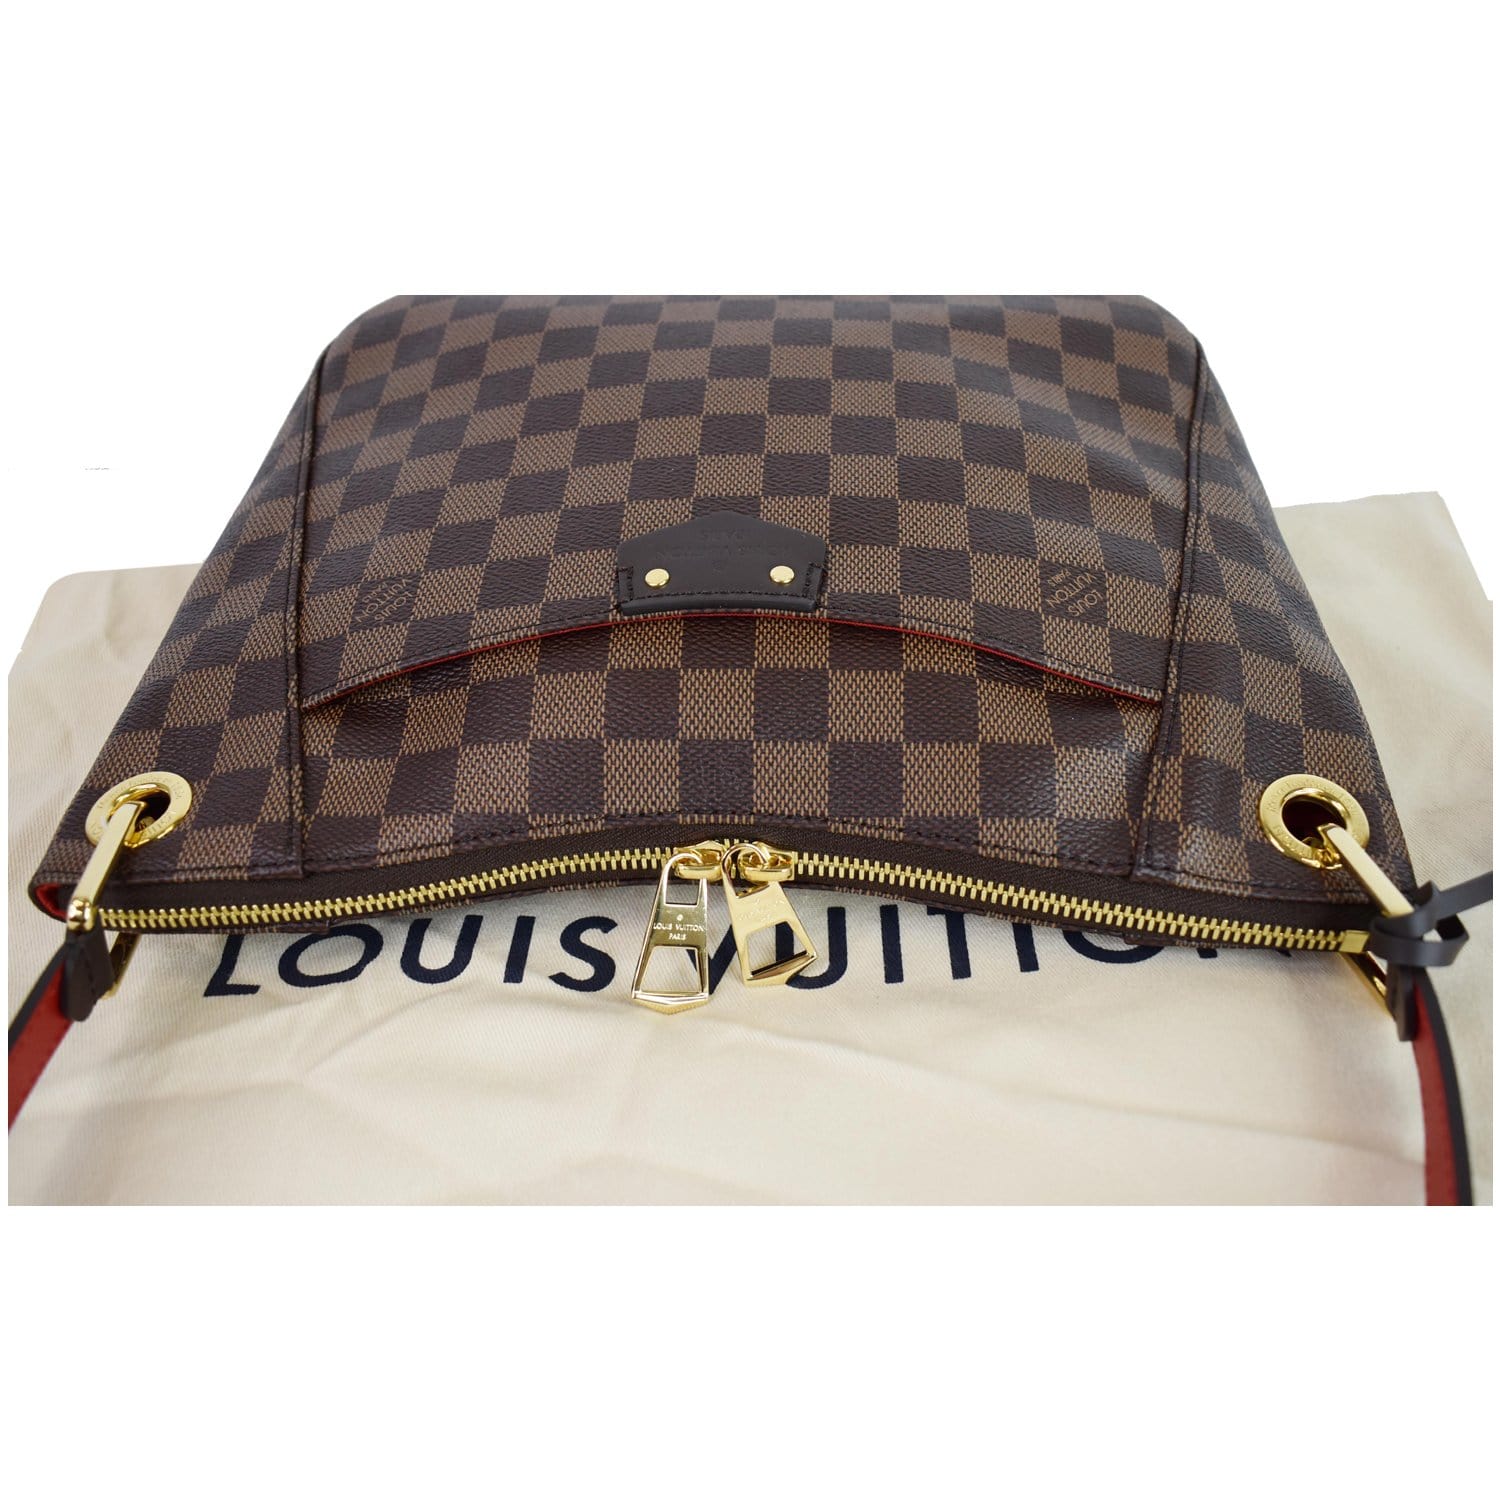 Louis Vuitton Canvas Damier Ebene South Bank Besace - Handbag | Pre-owned & Certified | used Second Hand | Unisex